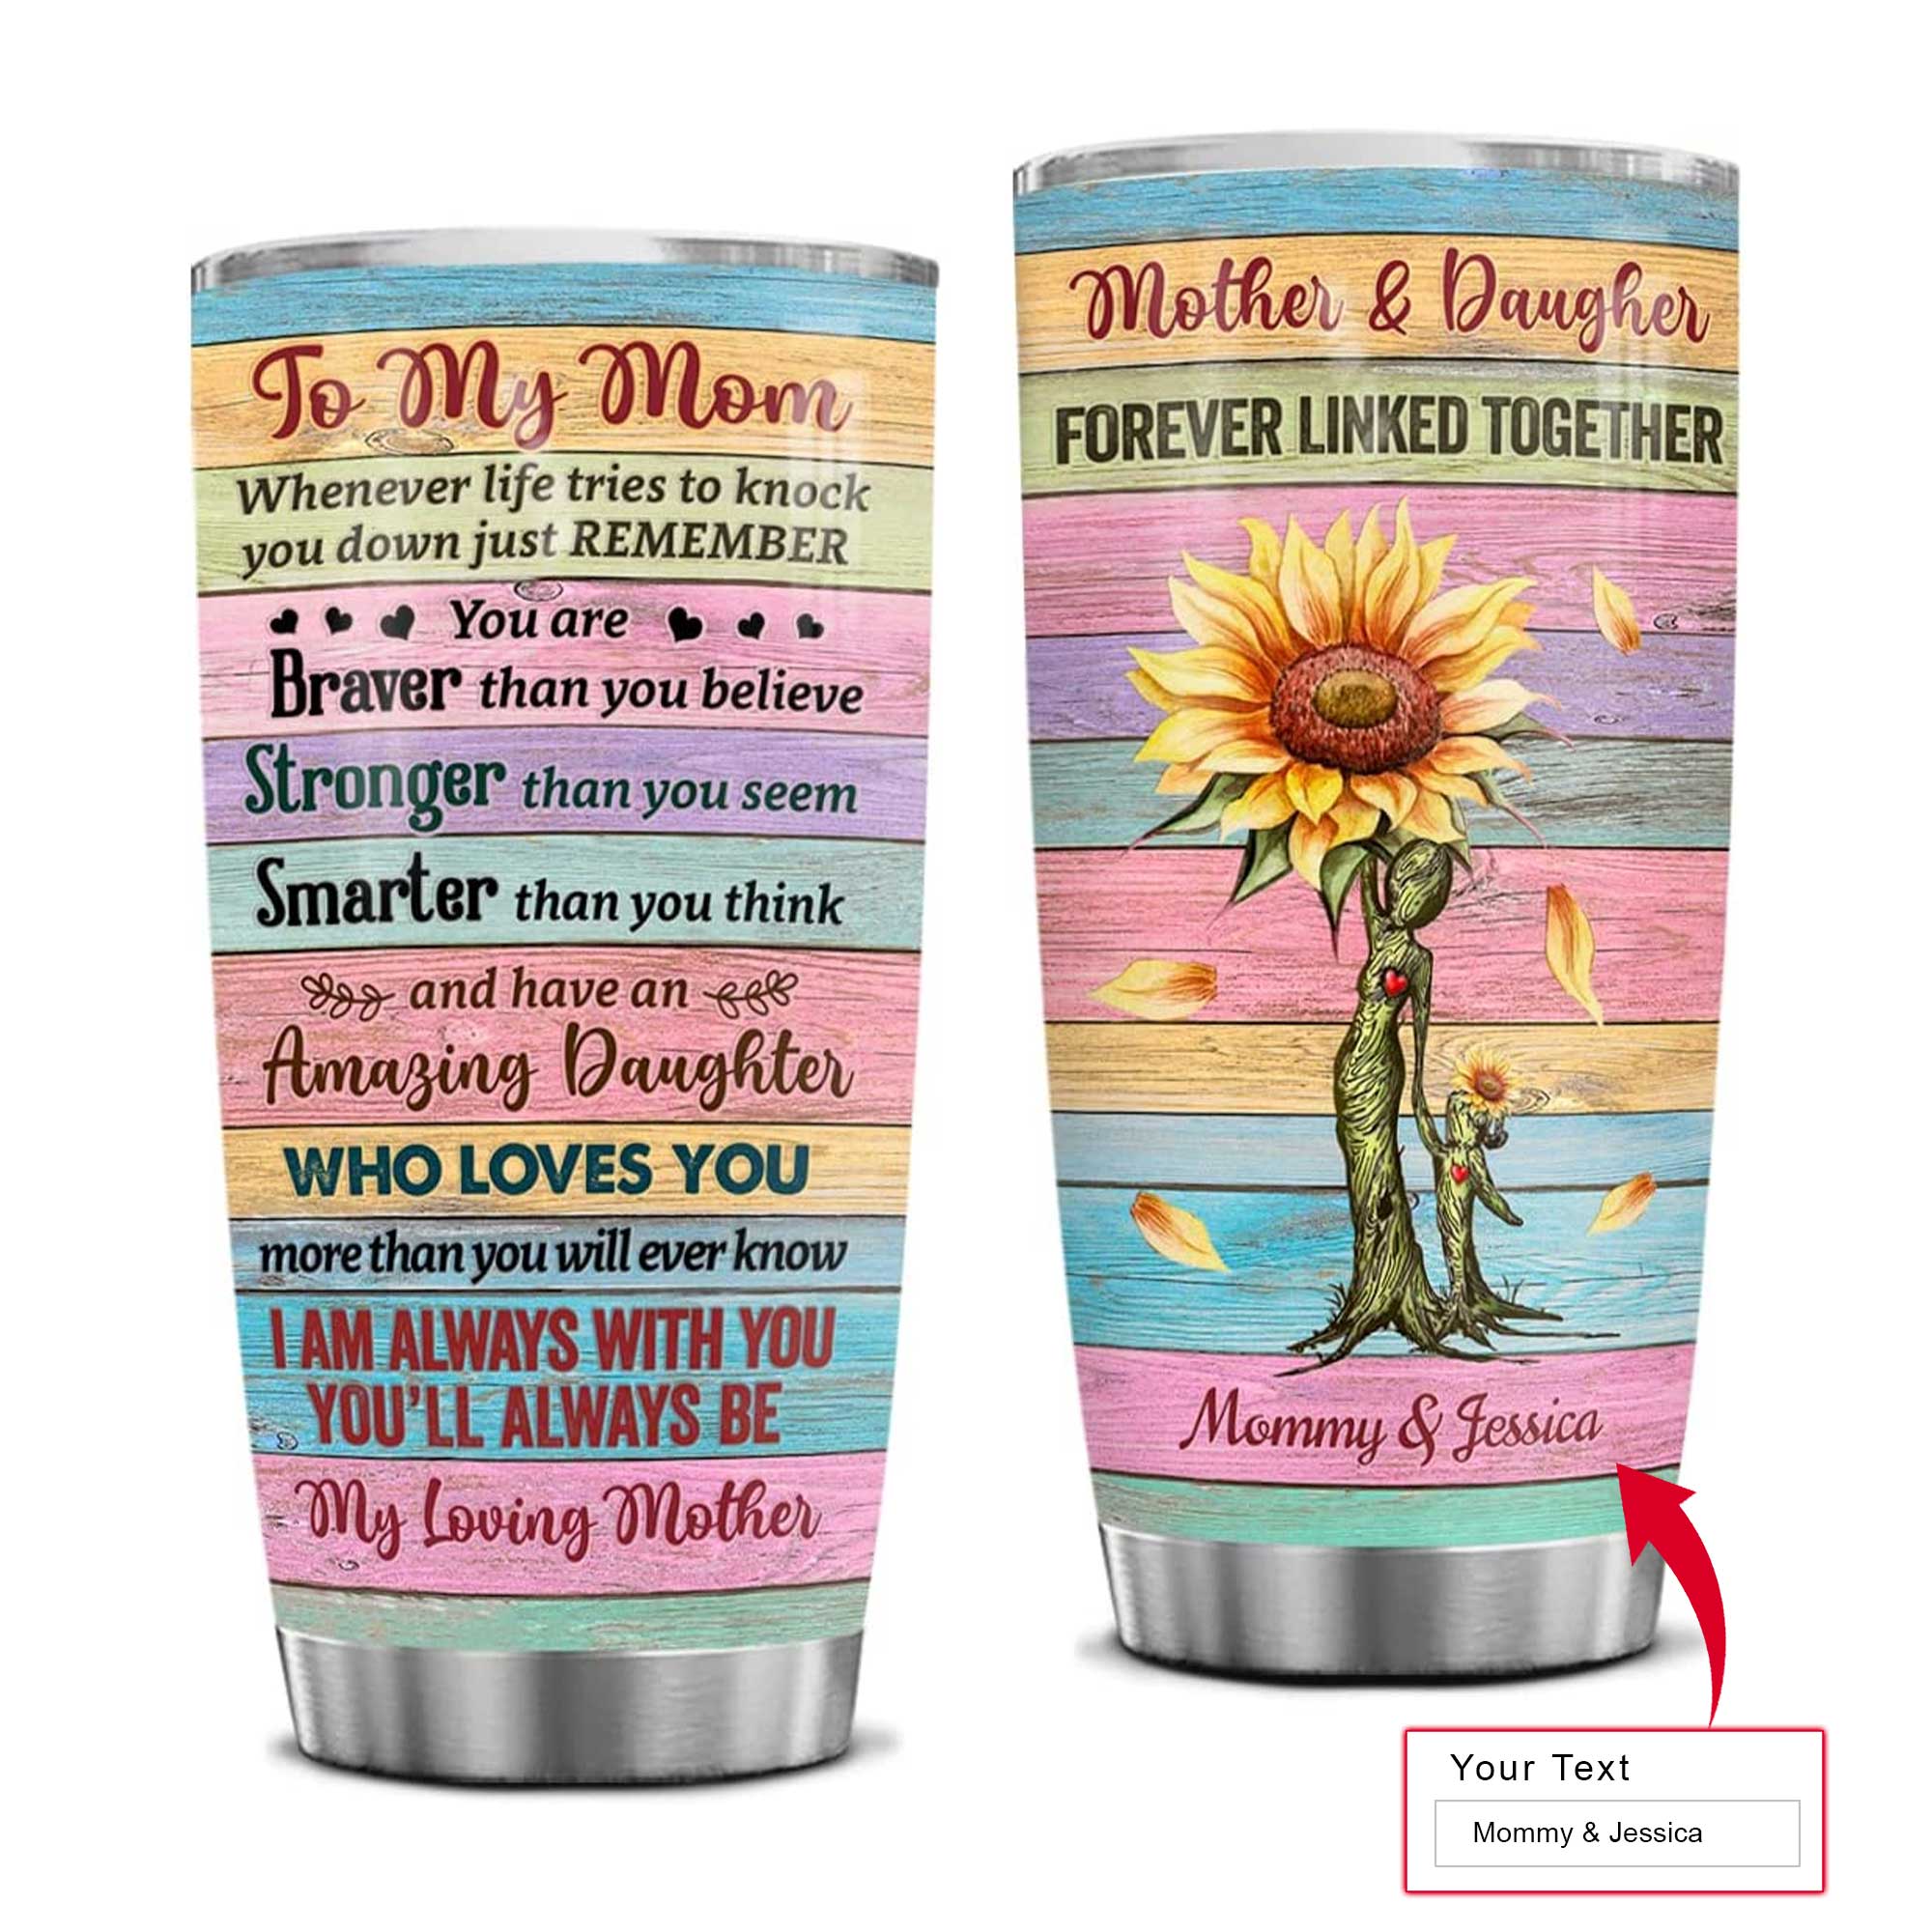 Personalized Mother's Day Gift Tumbler - Custom Gift For Mother's Day, Presents for Mom - To My Mom, Sunflower, Mother & Daughter Tumbler